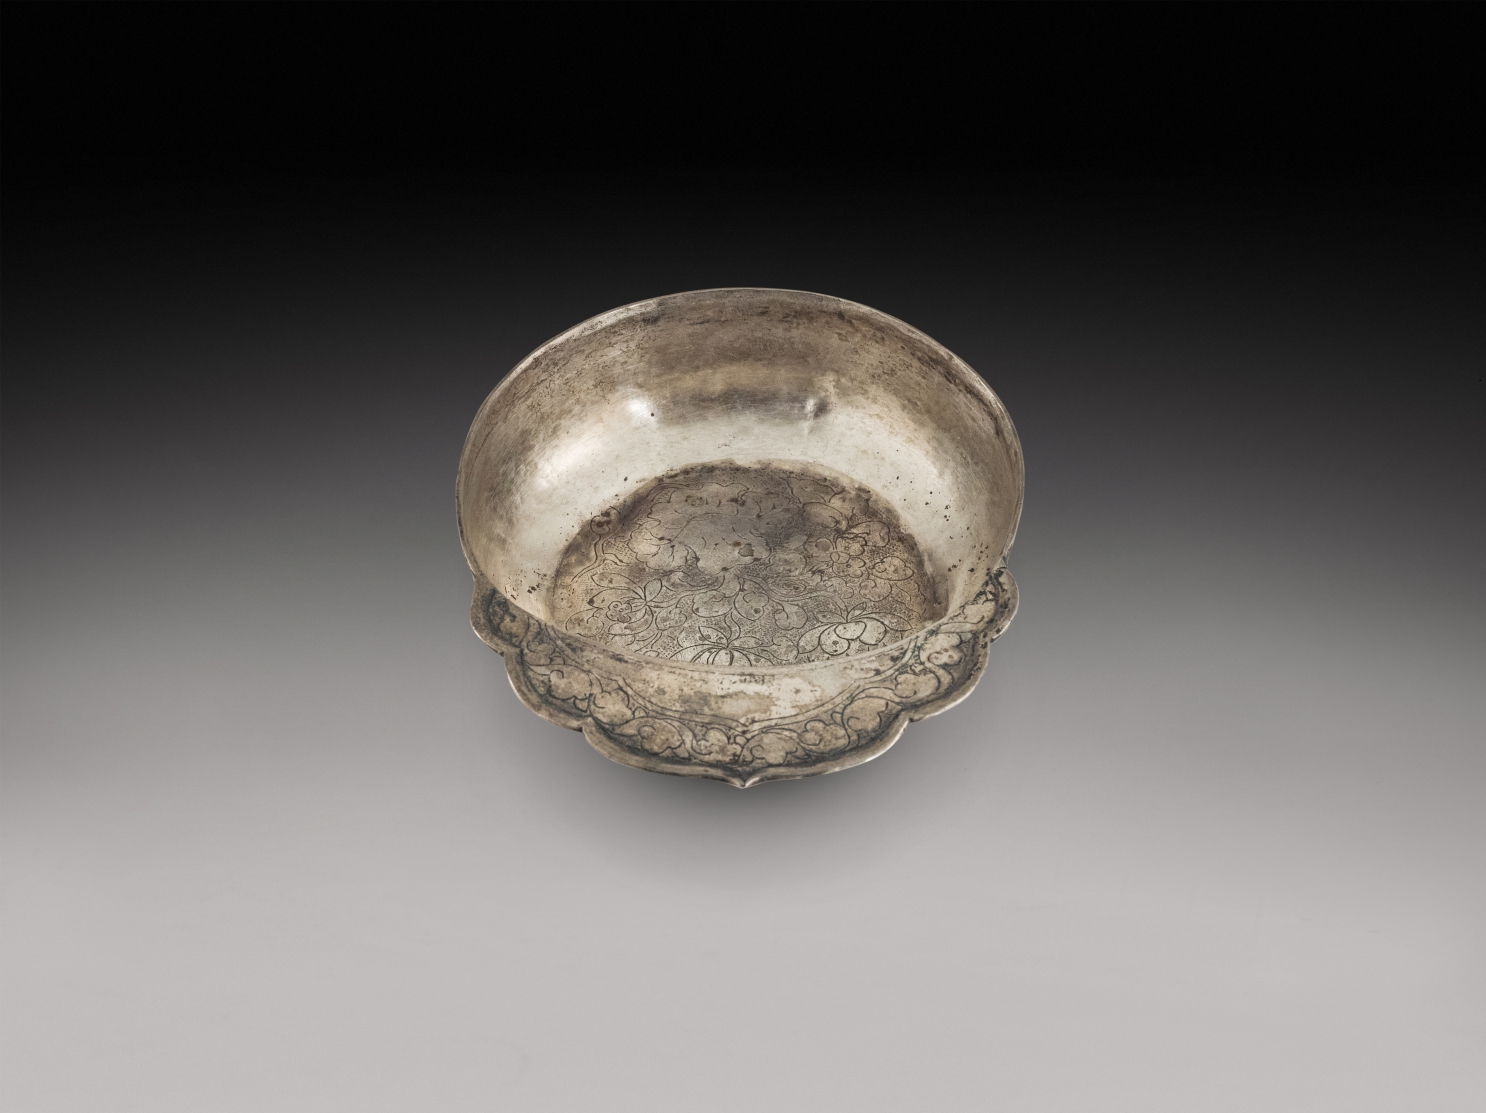 An engraved silver handled cup, Northern Song dynasty | 北宋 銀單把盃 - Image 5 of 5